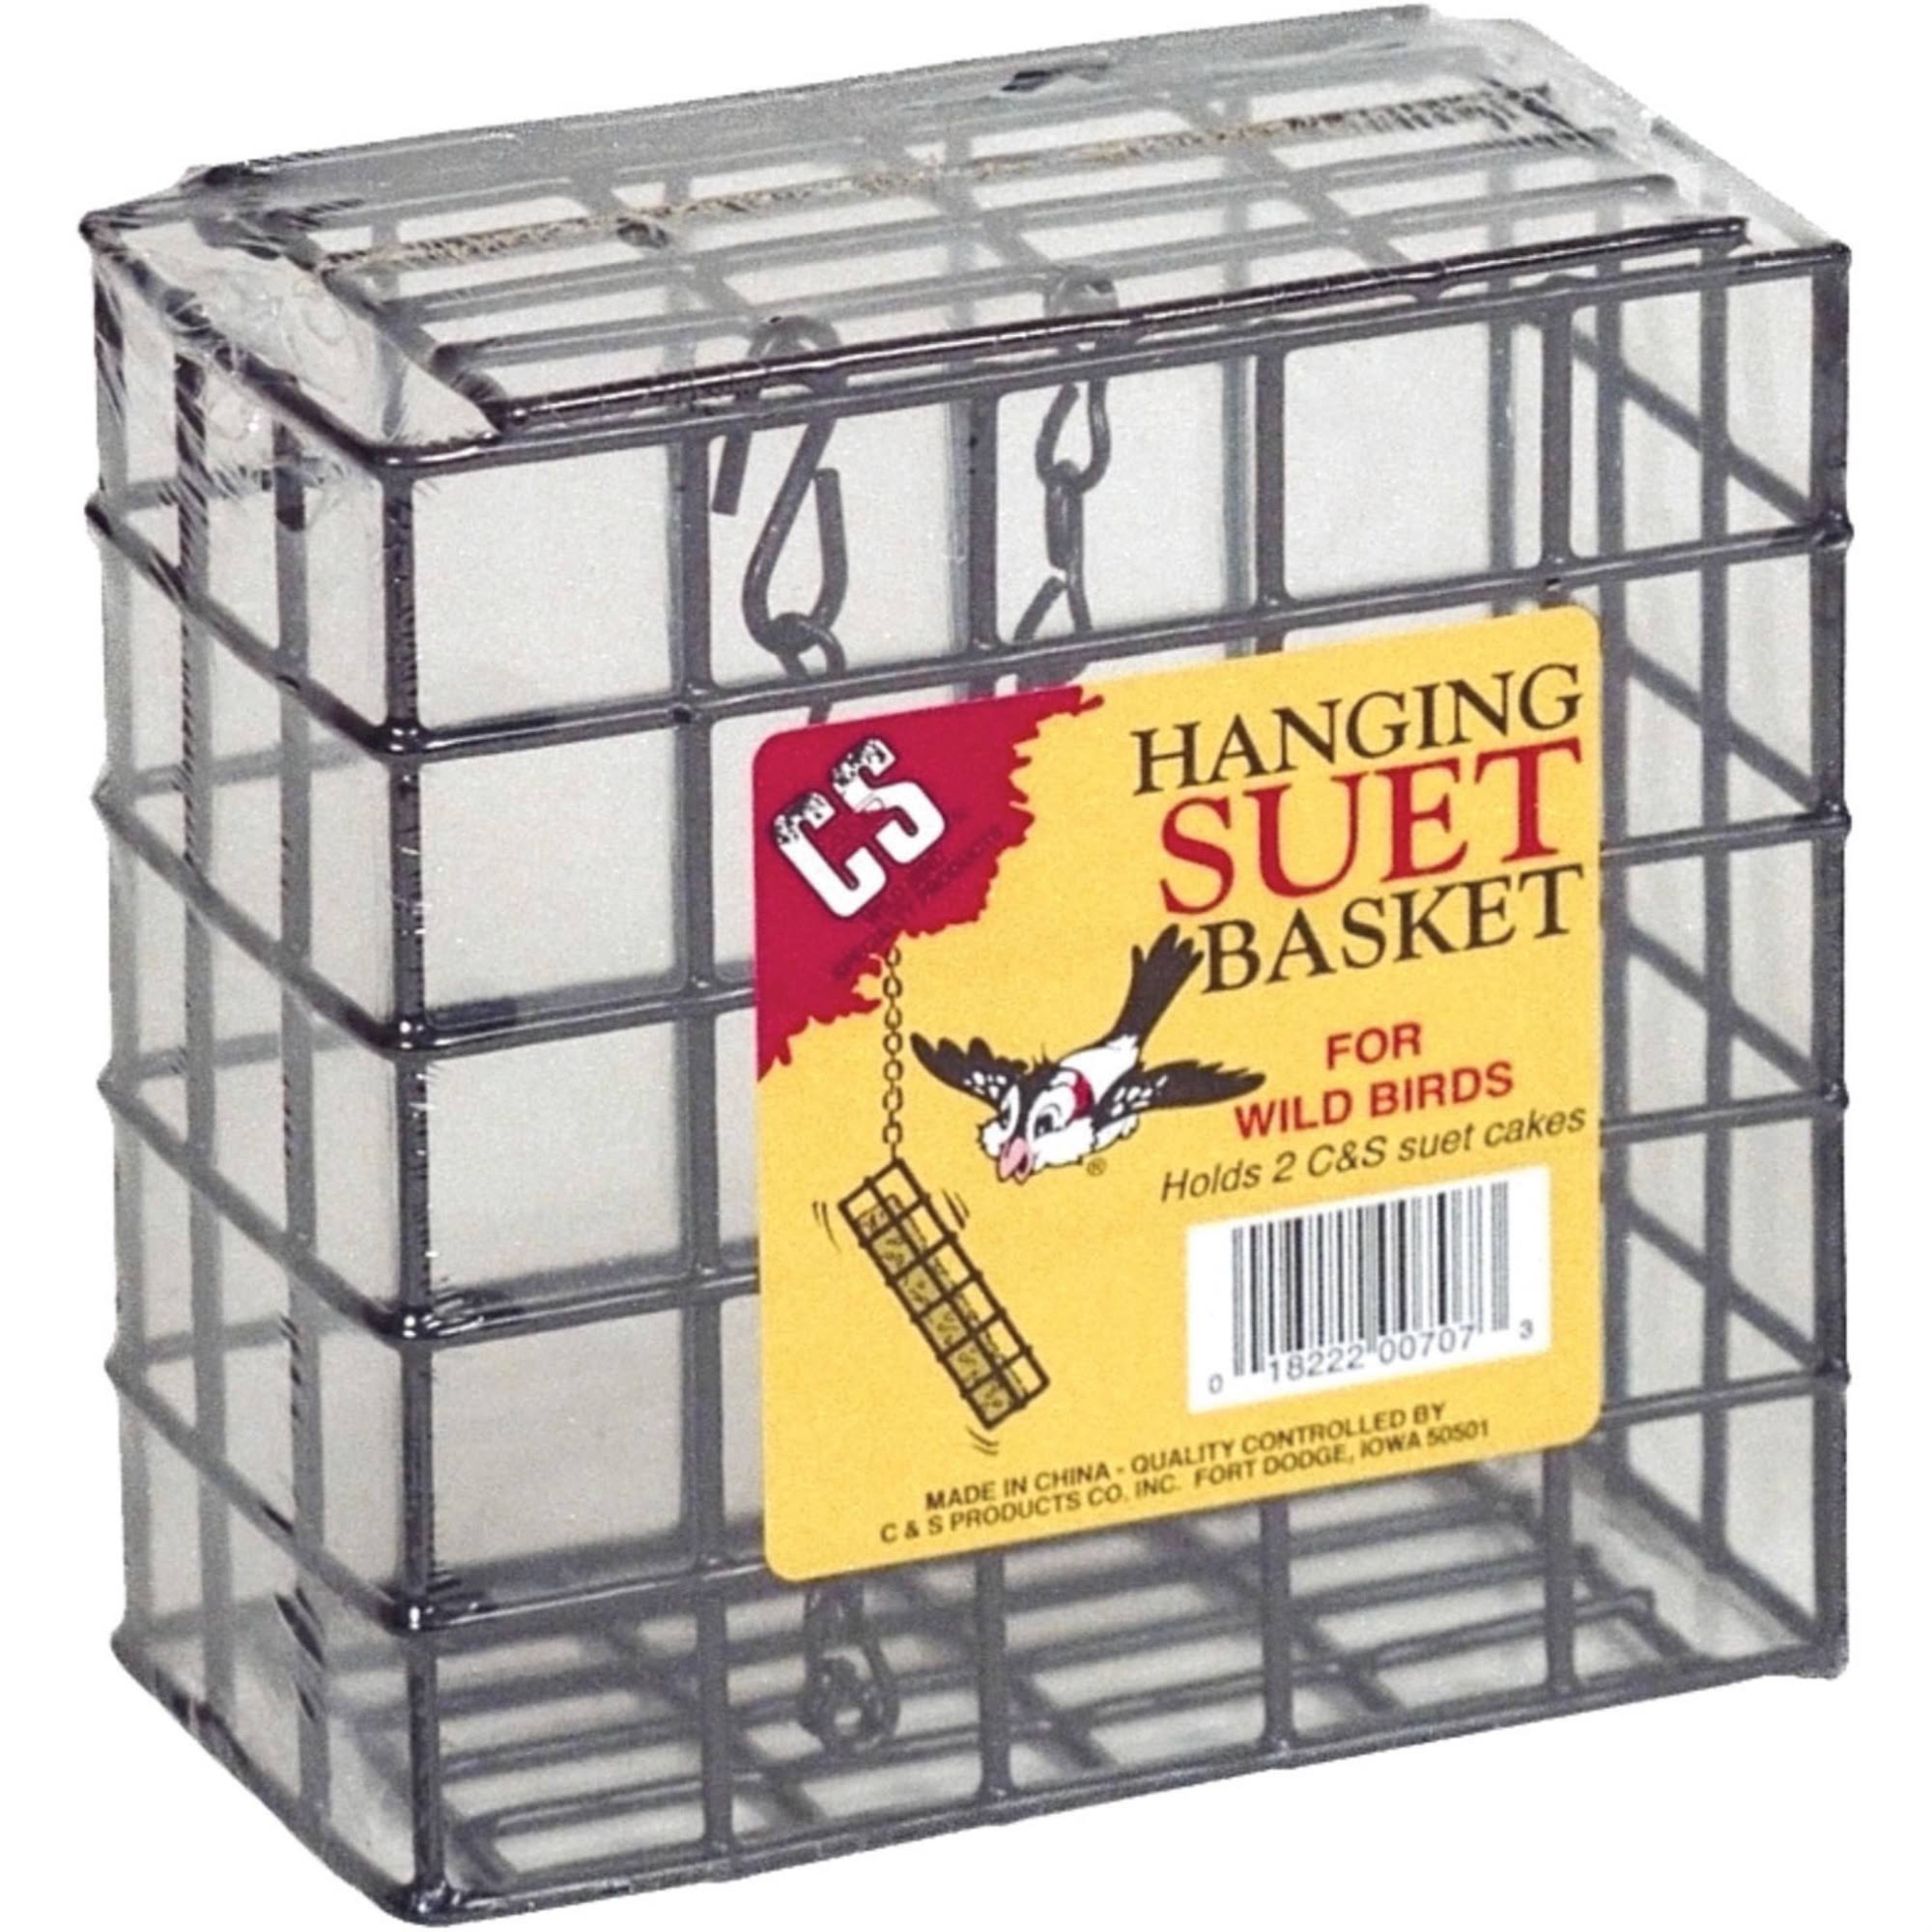 C and S Products Back to Double Suet Feeder - 5 1/4", Black